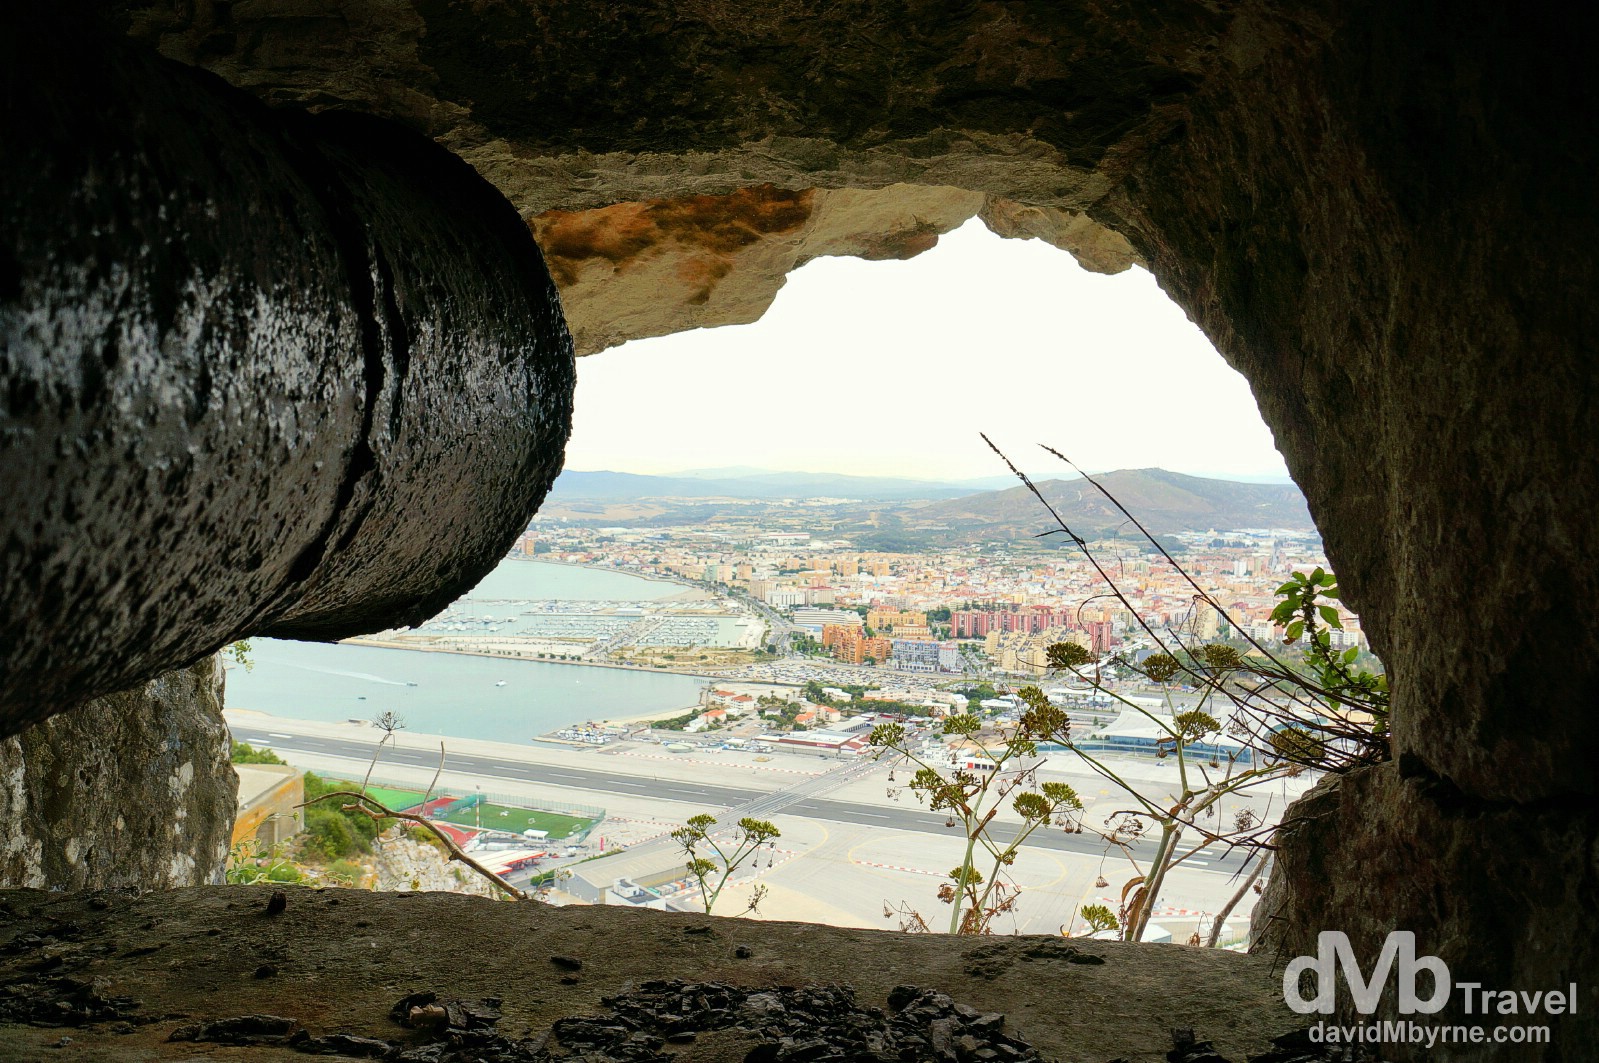 Looking out from one of the openings in the Great Siege Tunnels in The Upper Rock Nature Reserve, Gibraltar. June 5th, 2014.